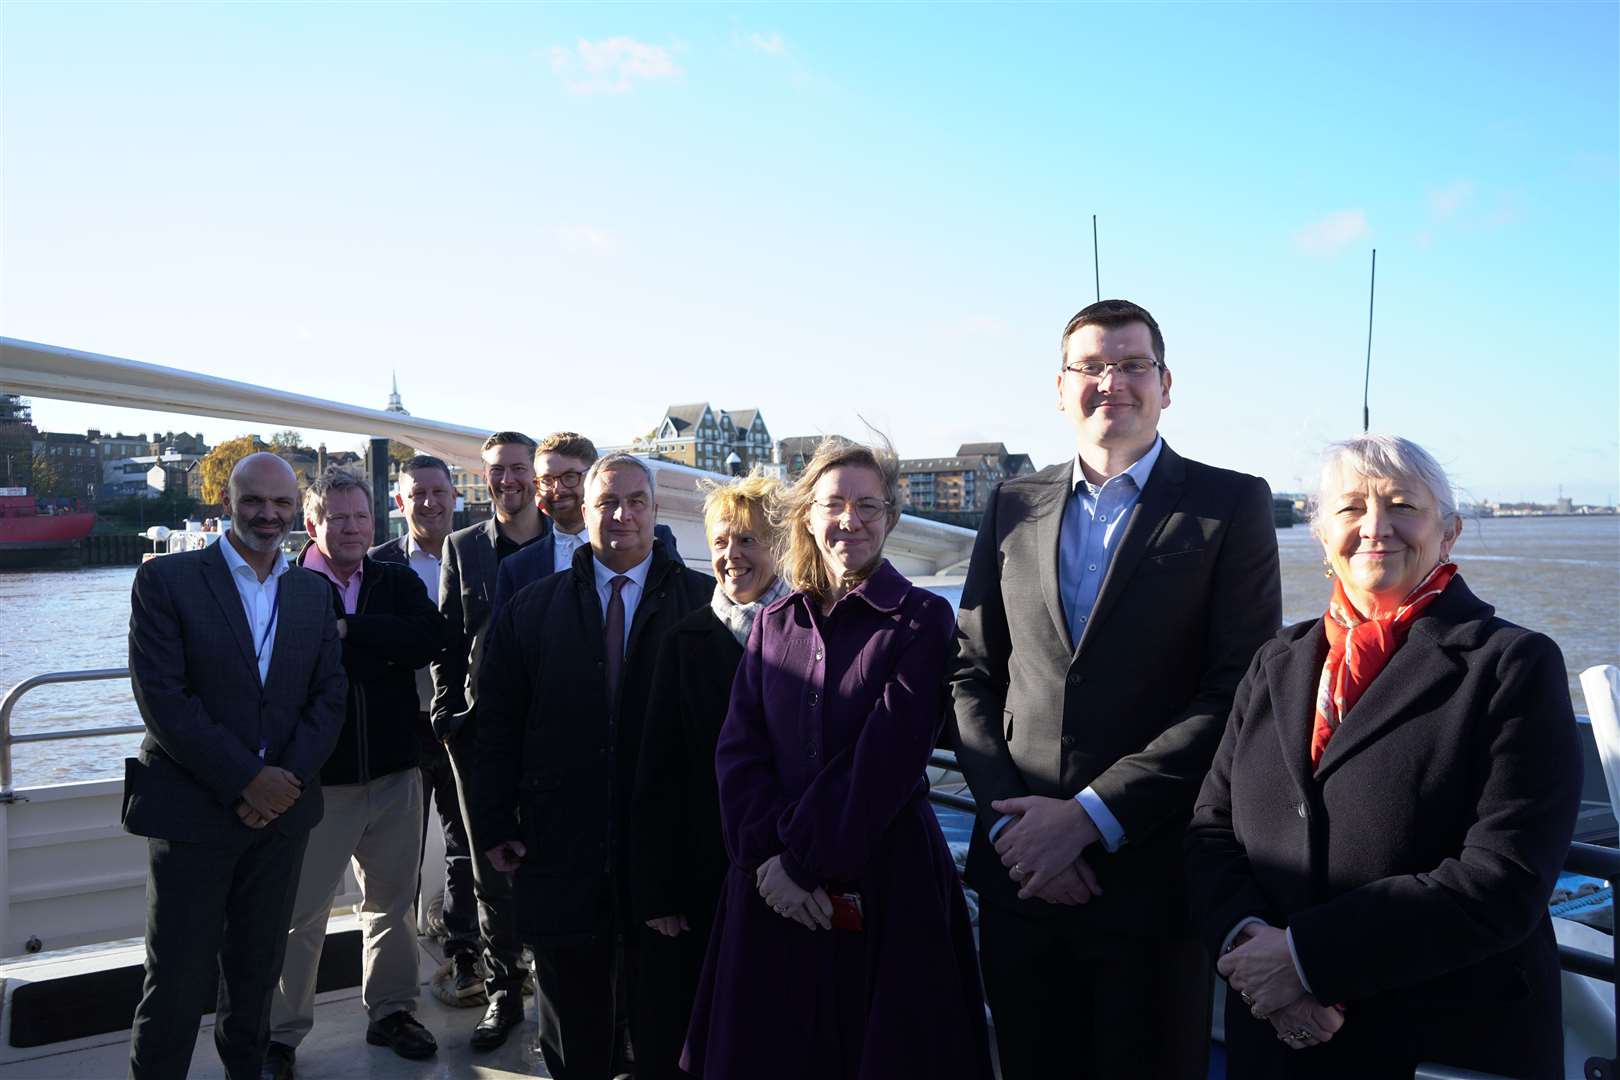 Representatives from the government and other organisations joined the council on a trip around the town. Picture: Gravesham Borough Council